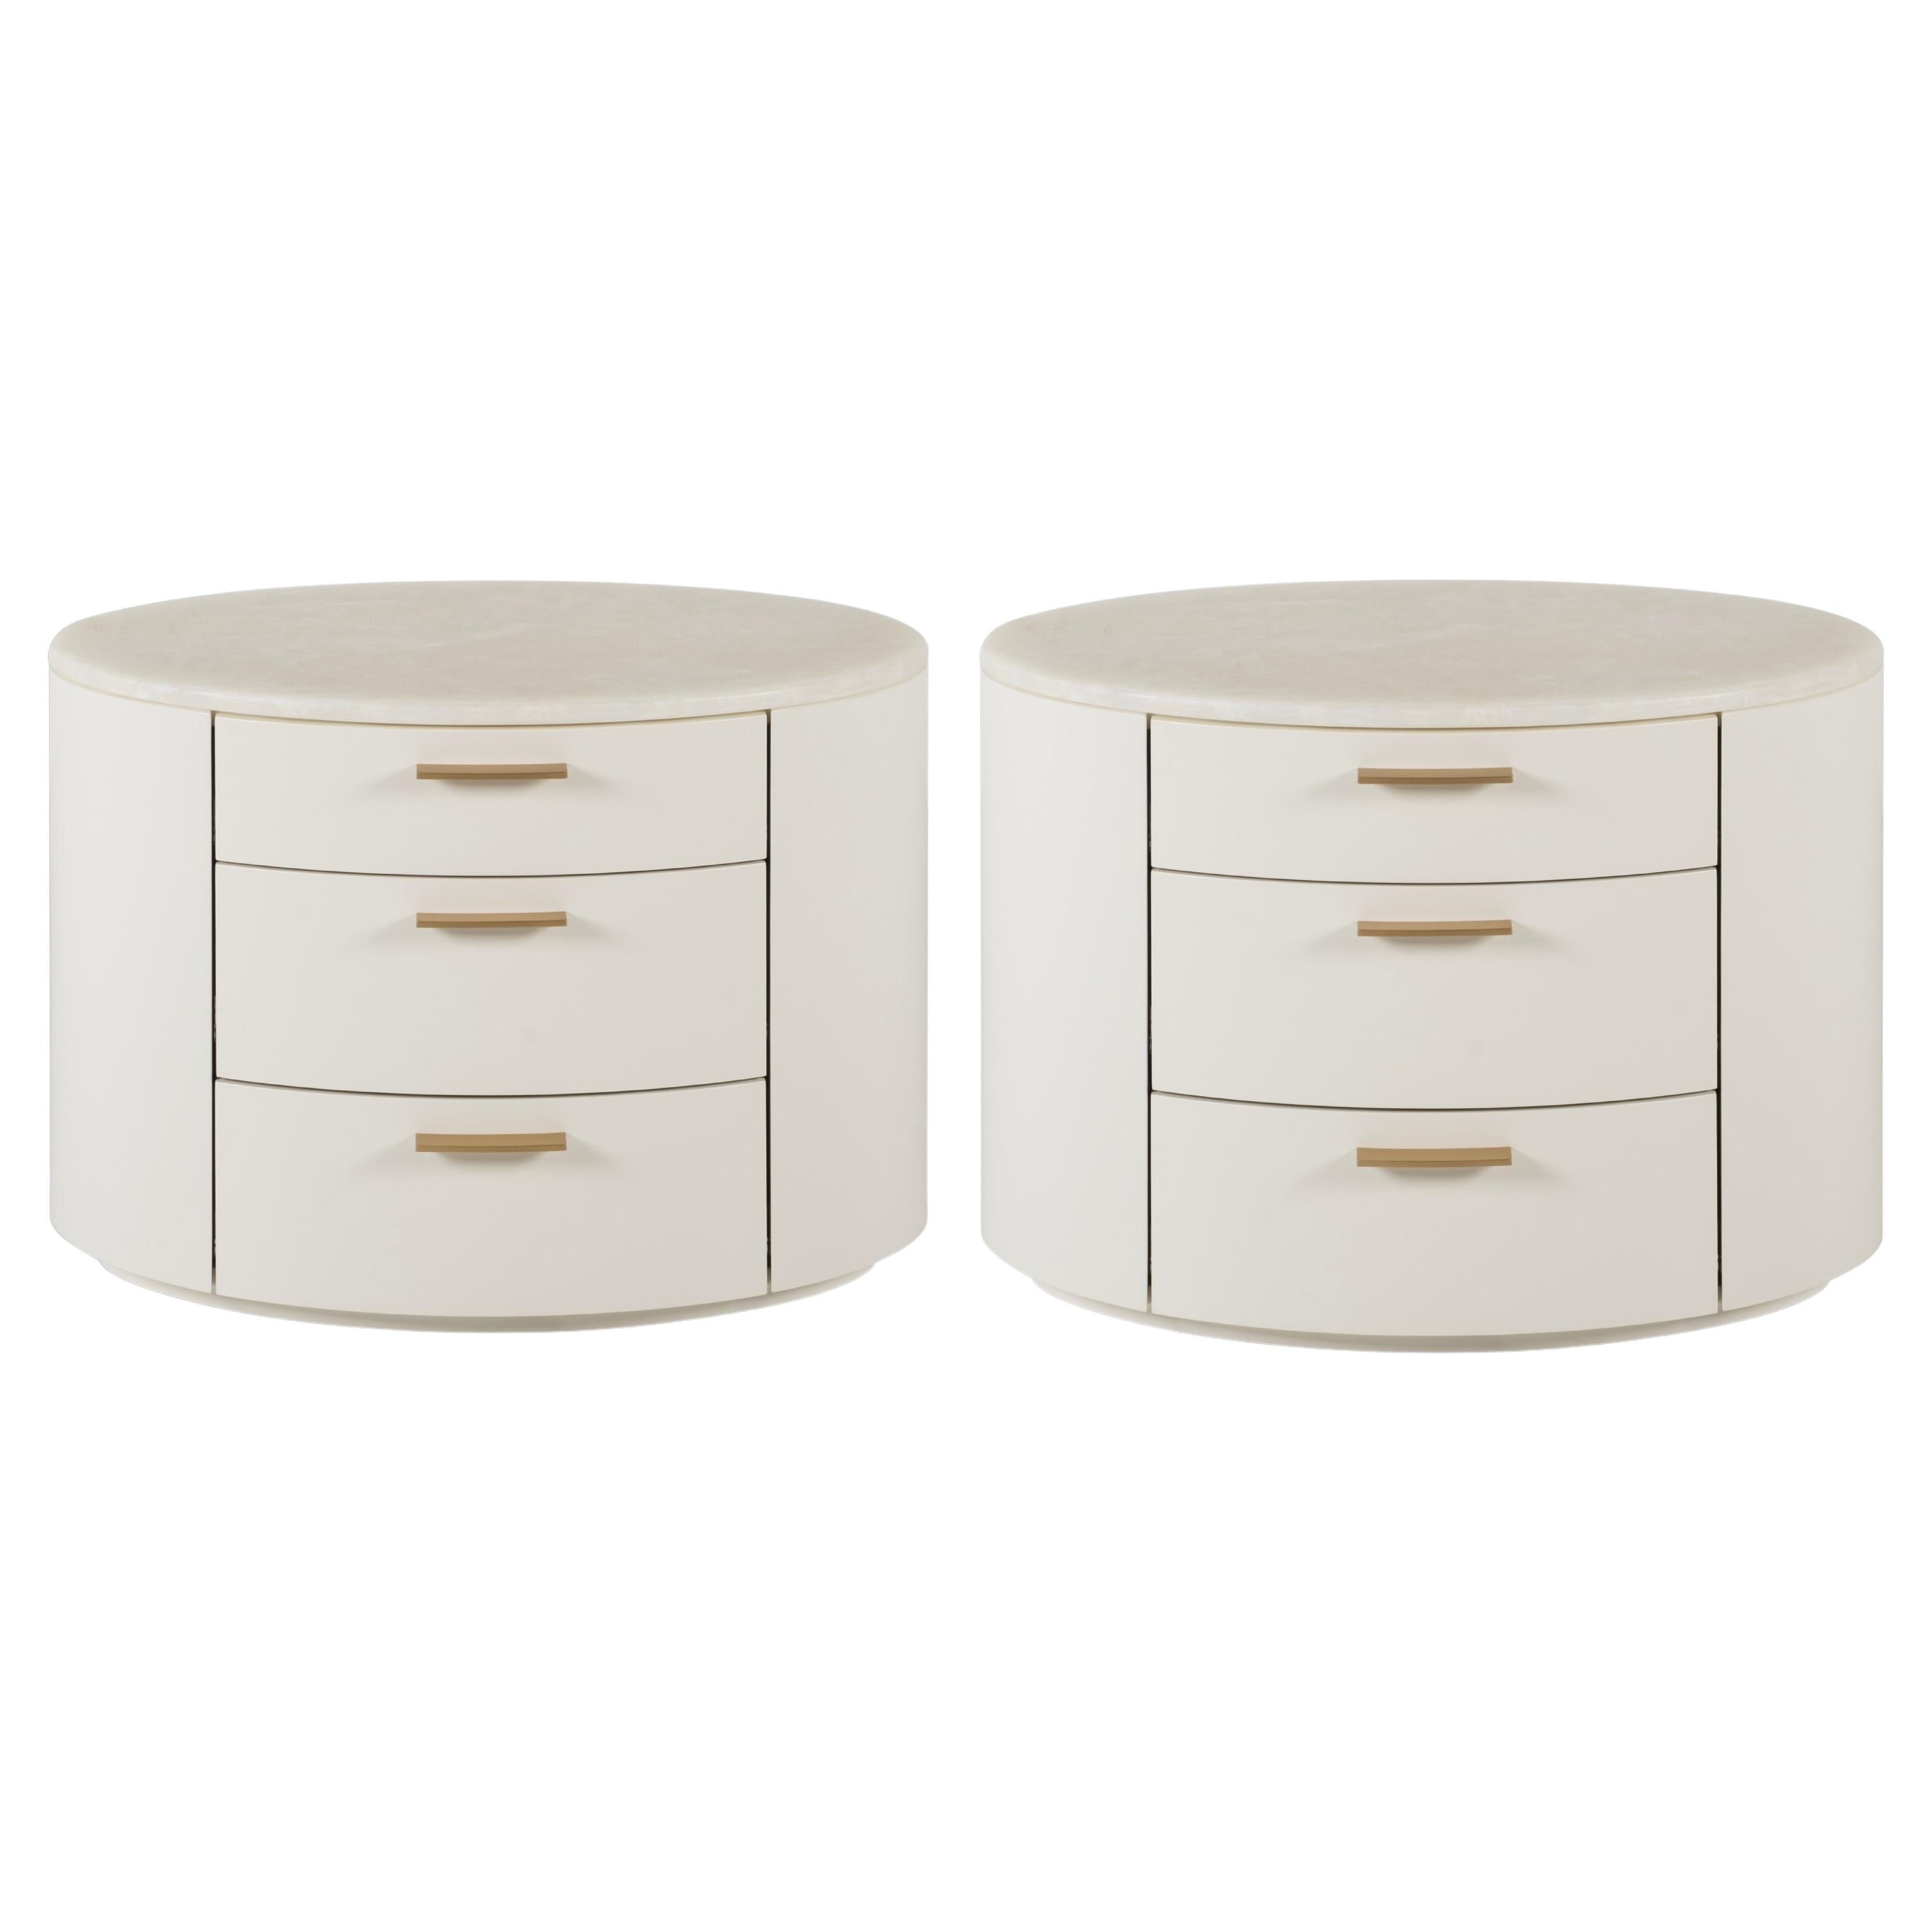 New And Custom Commodes and Chests of Drawers